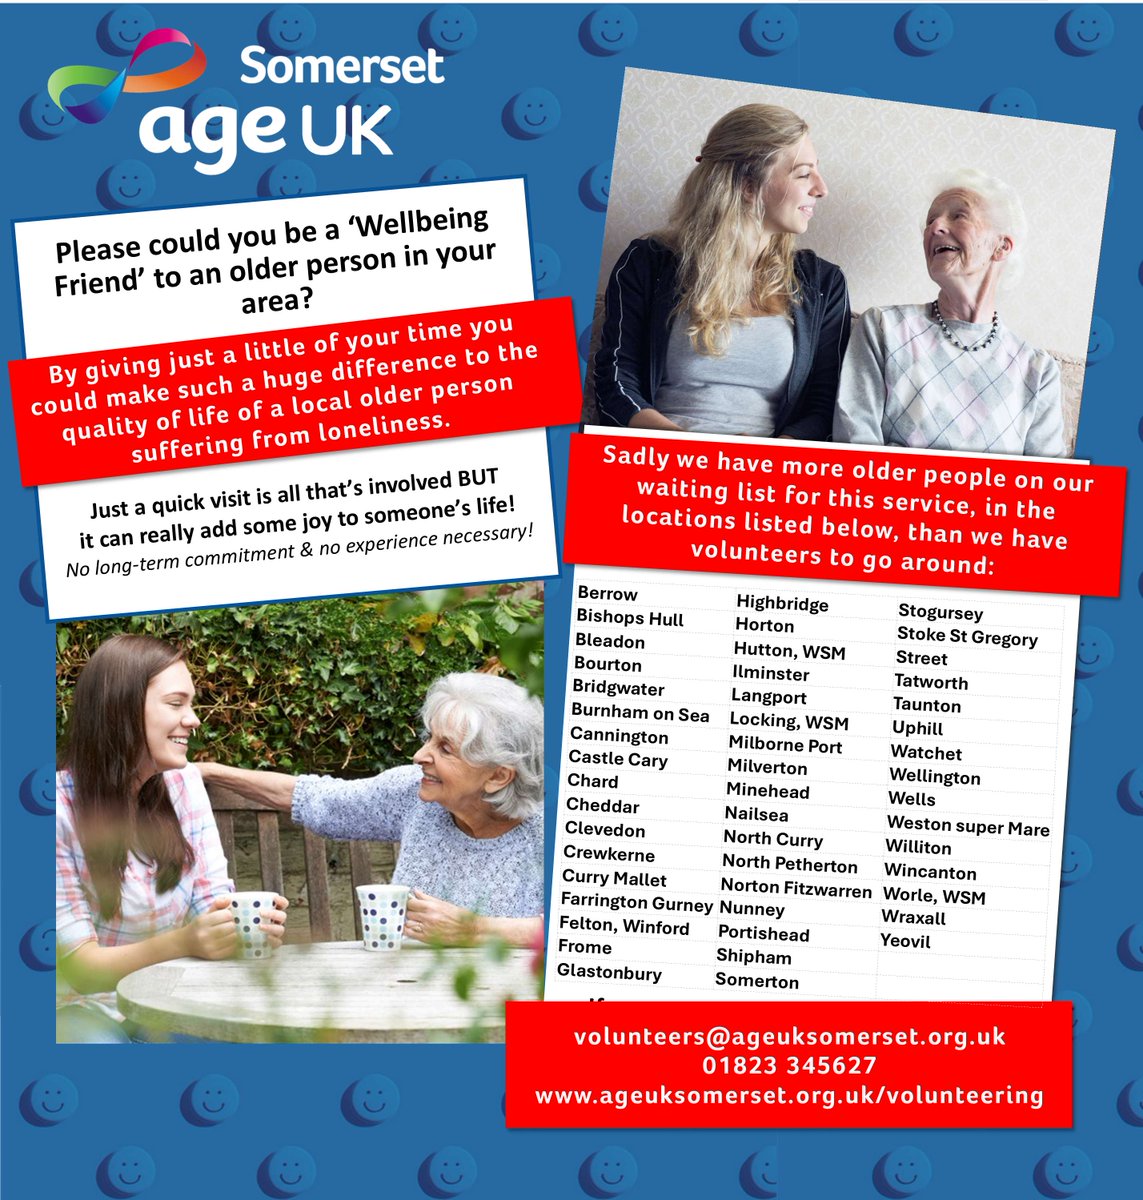 Is where you live in #Somerset listed? If so we have older people who live near you who've said they feel lonely & are on our waiting list for a friendly person like you to become a Wellbeing Friend or Walk & Talk #Volunteer & brighten their lives. ➡️ ageuk.org.uk/somerset/get-i…